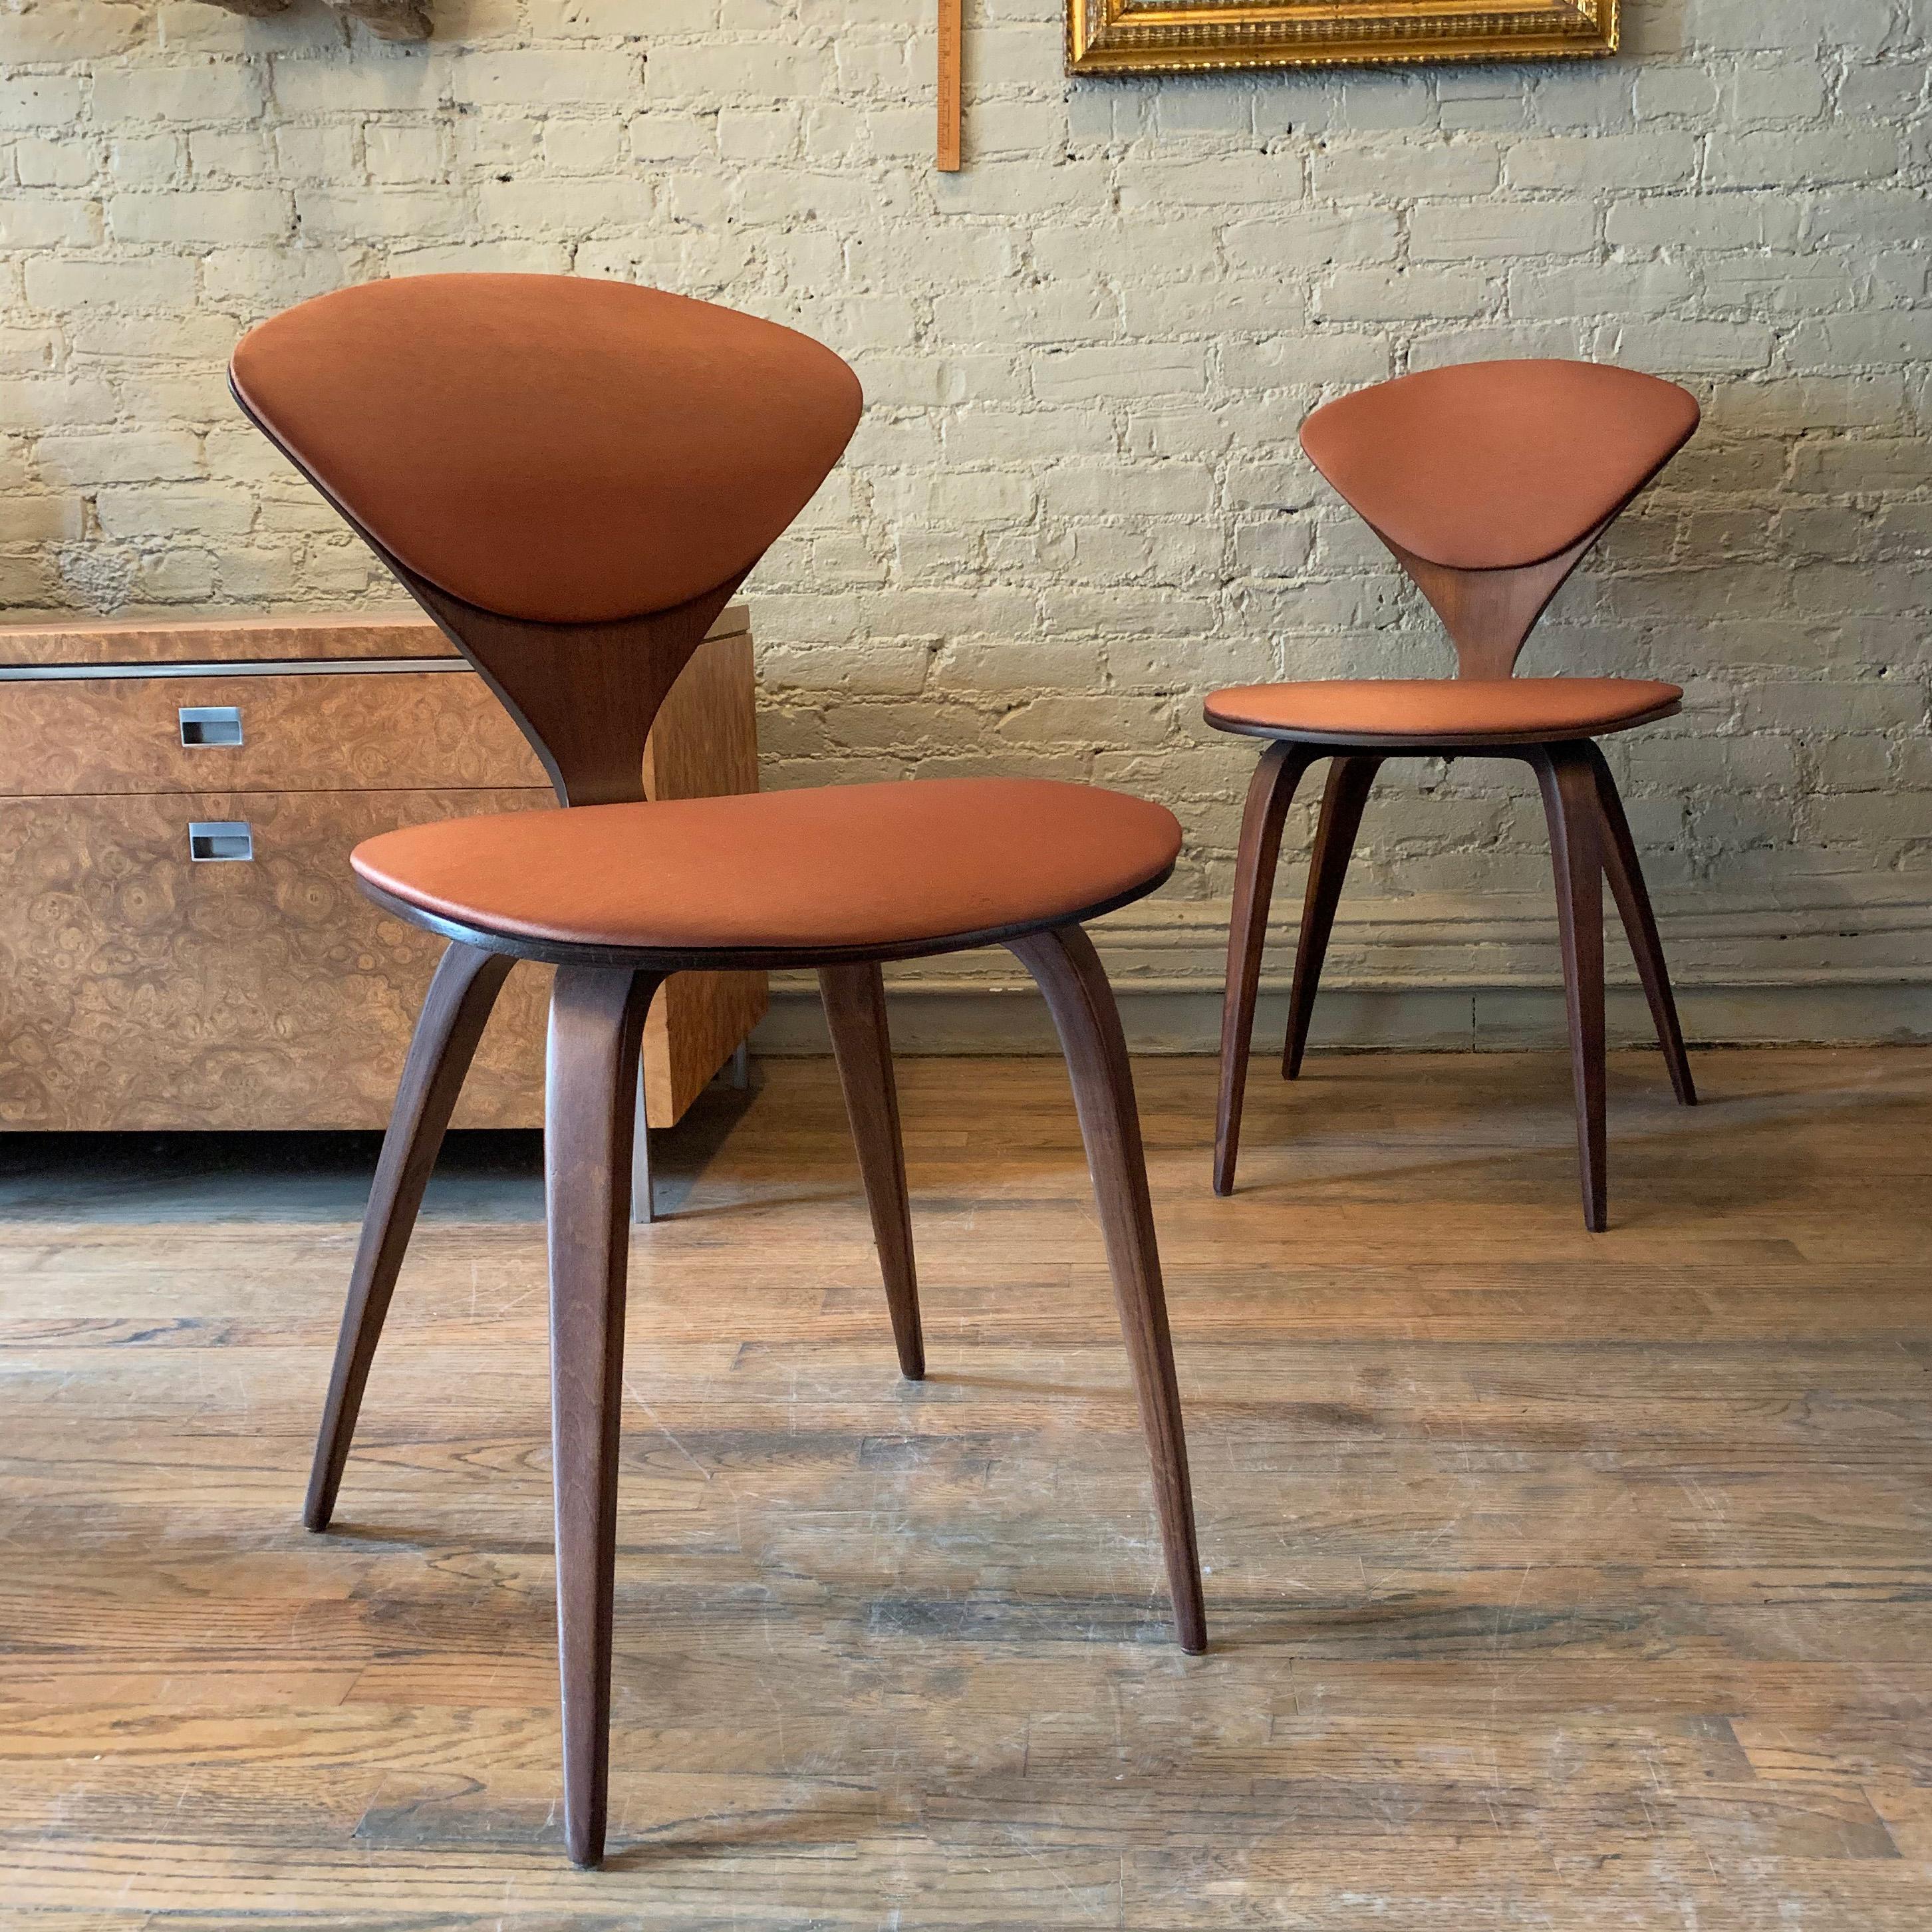 Pair of iconic, maple bentwood chairs by Norman Cherner for Plycraft feature burnt orange sheen upholstery on seat and back.